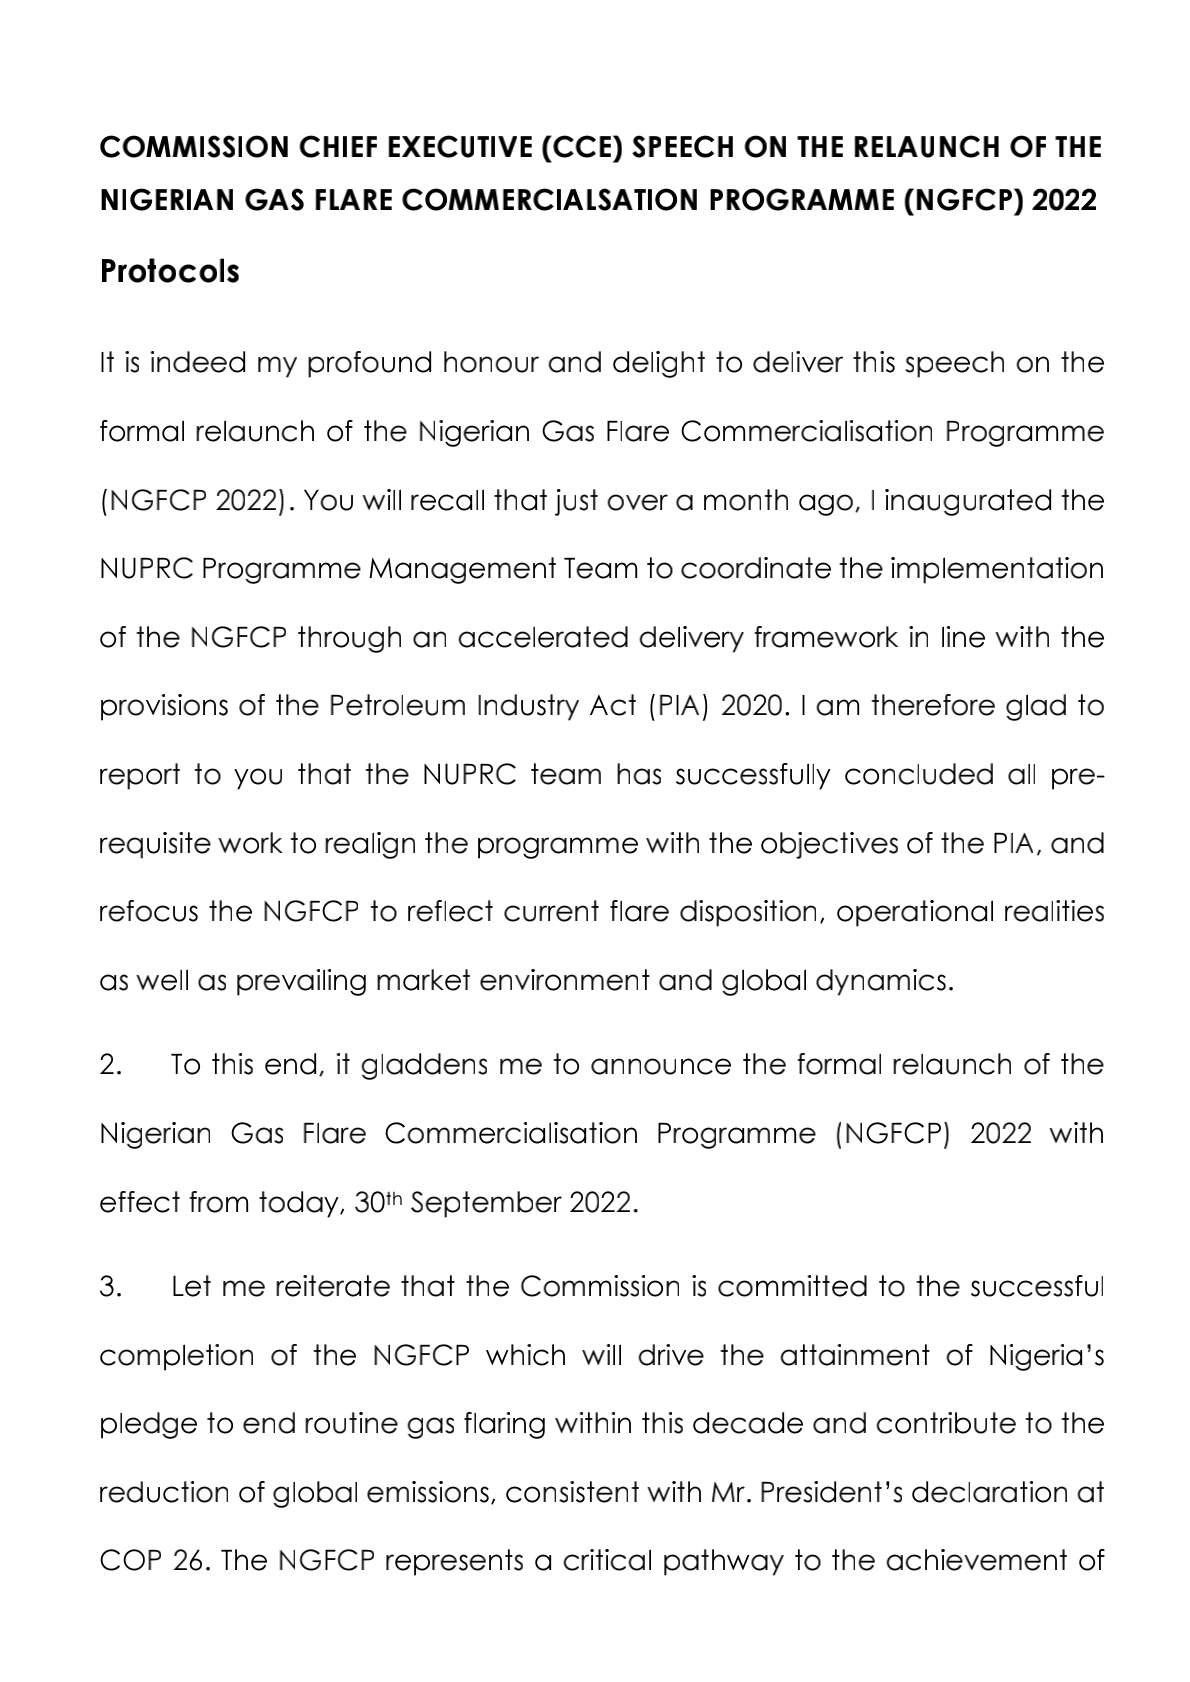 Nigerian Gas Flare Commercialisation Programme: CCE’s Speech on the Relaunch